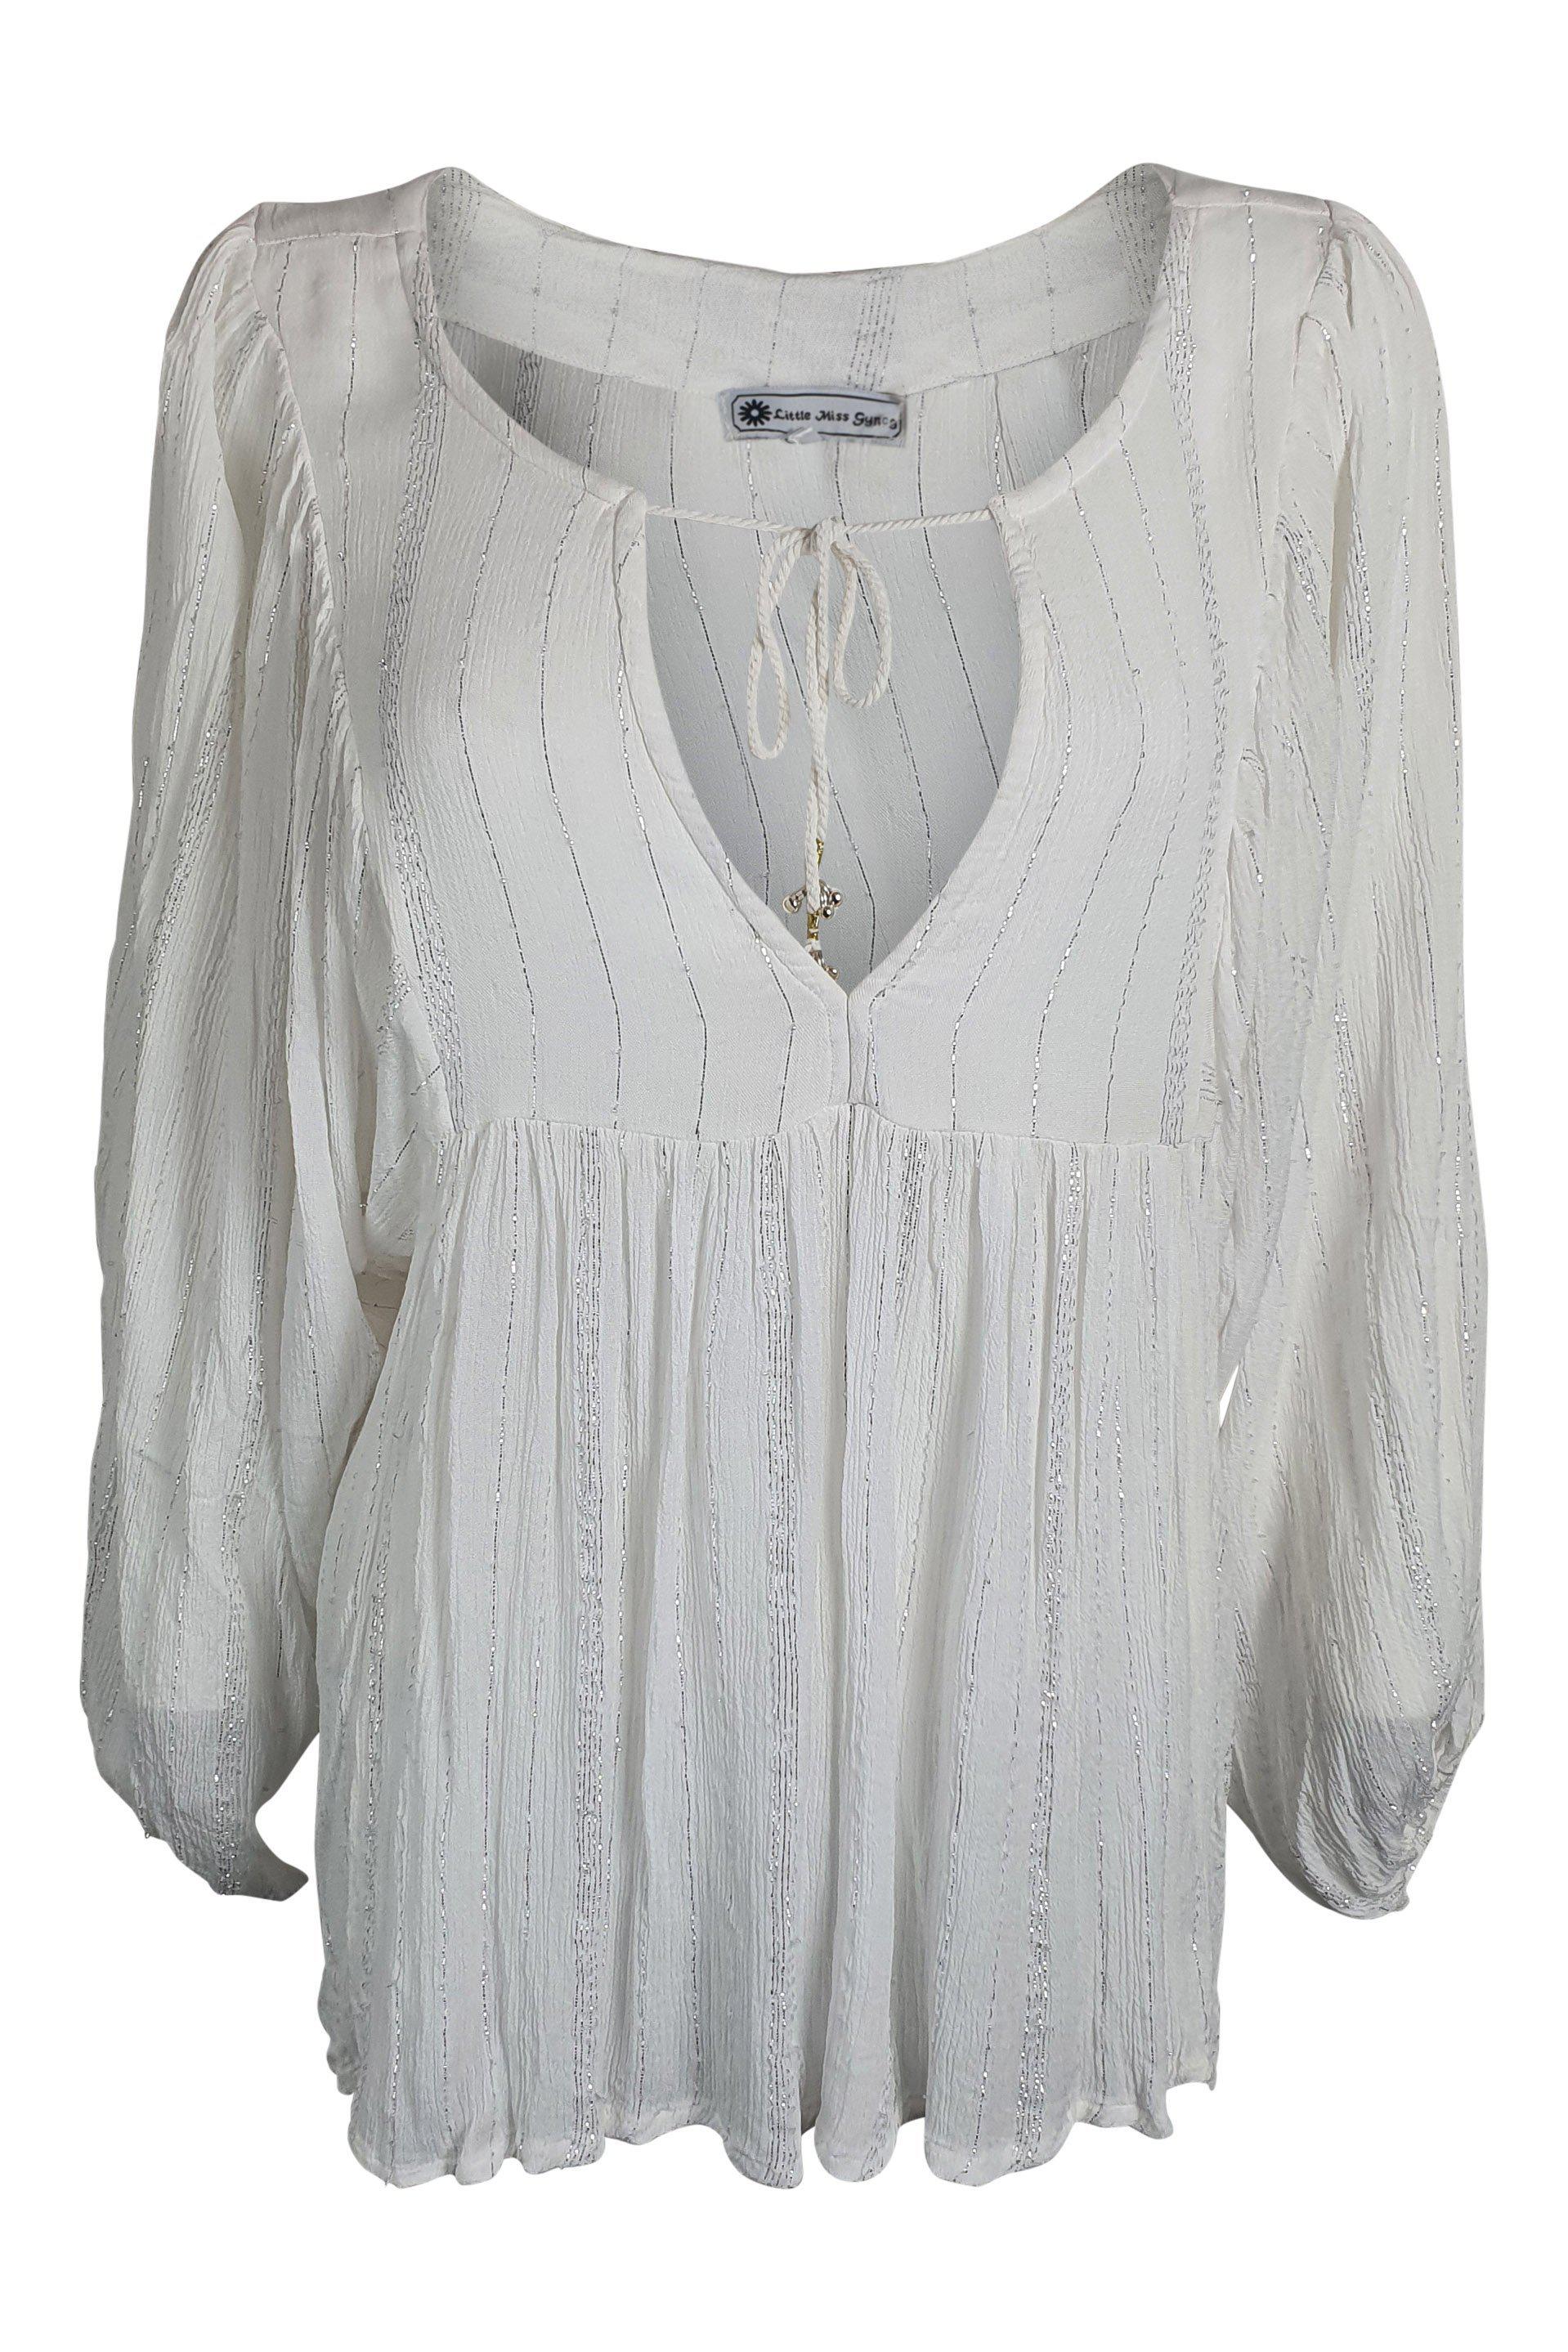 LITTLE MISS GYPSY White Garden Party Tie Front Blouse (S/M)-The Freperie